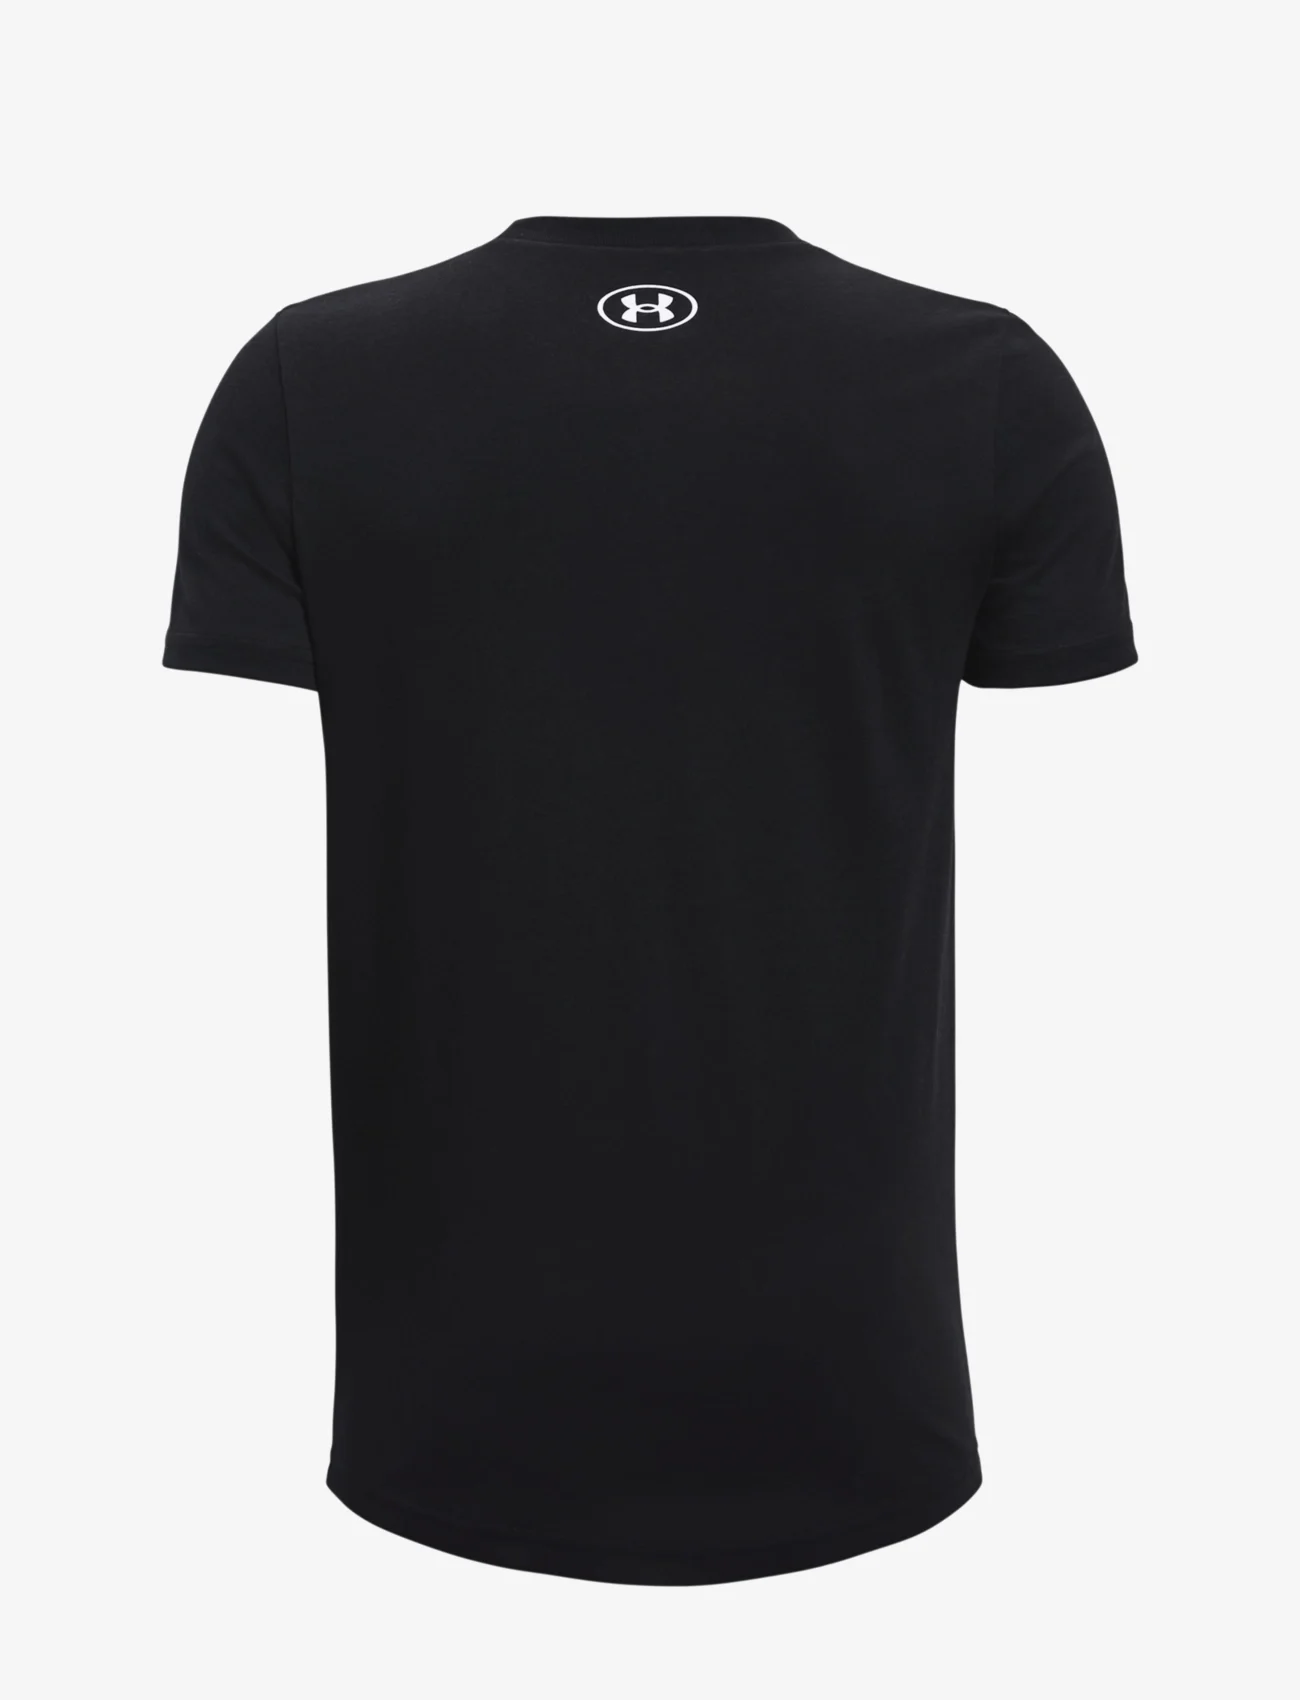 Under Armour - UA B SPORTSTYLE LEFT CHEST SS - sports tops - black - 0